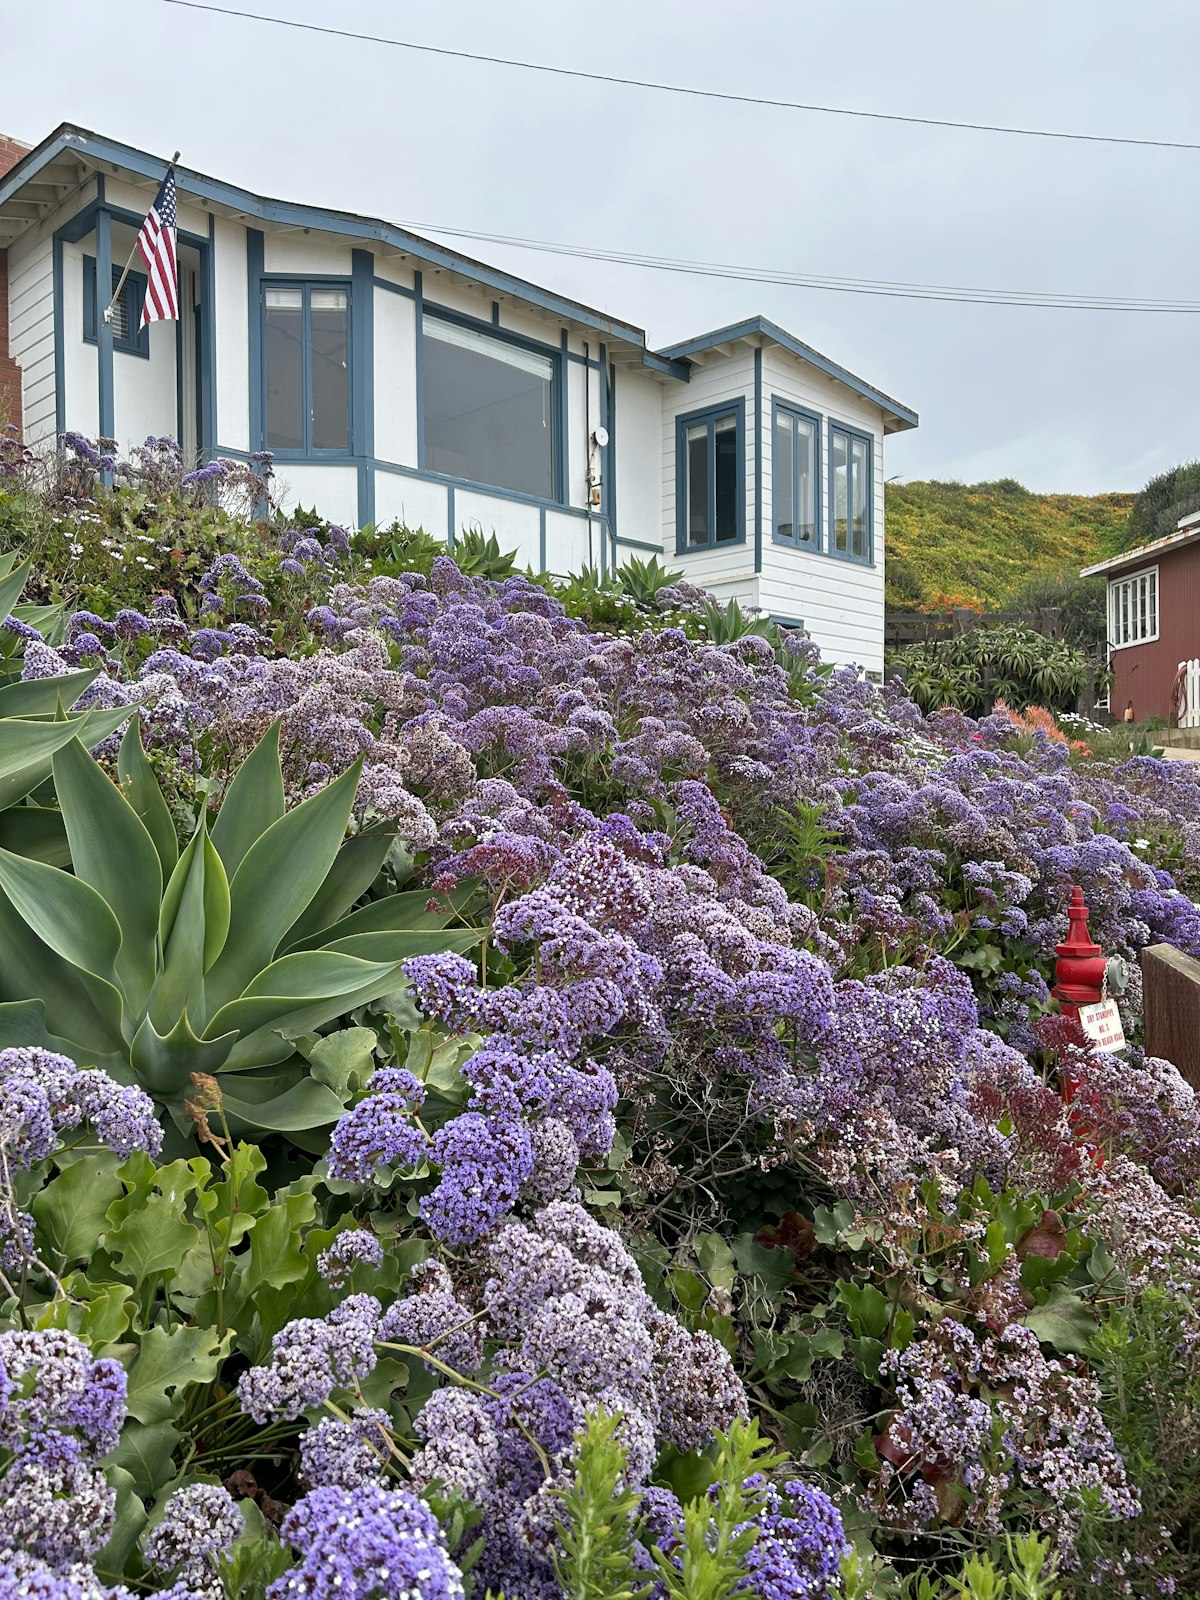 Cottage at Crystal Cove State Park